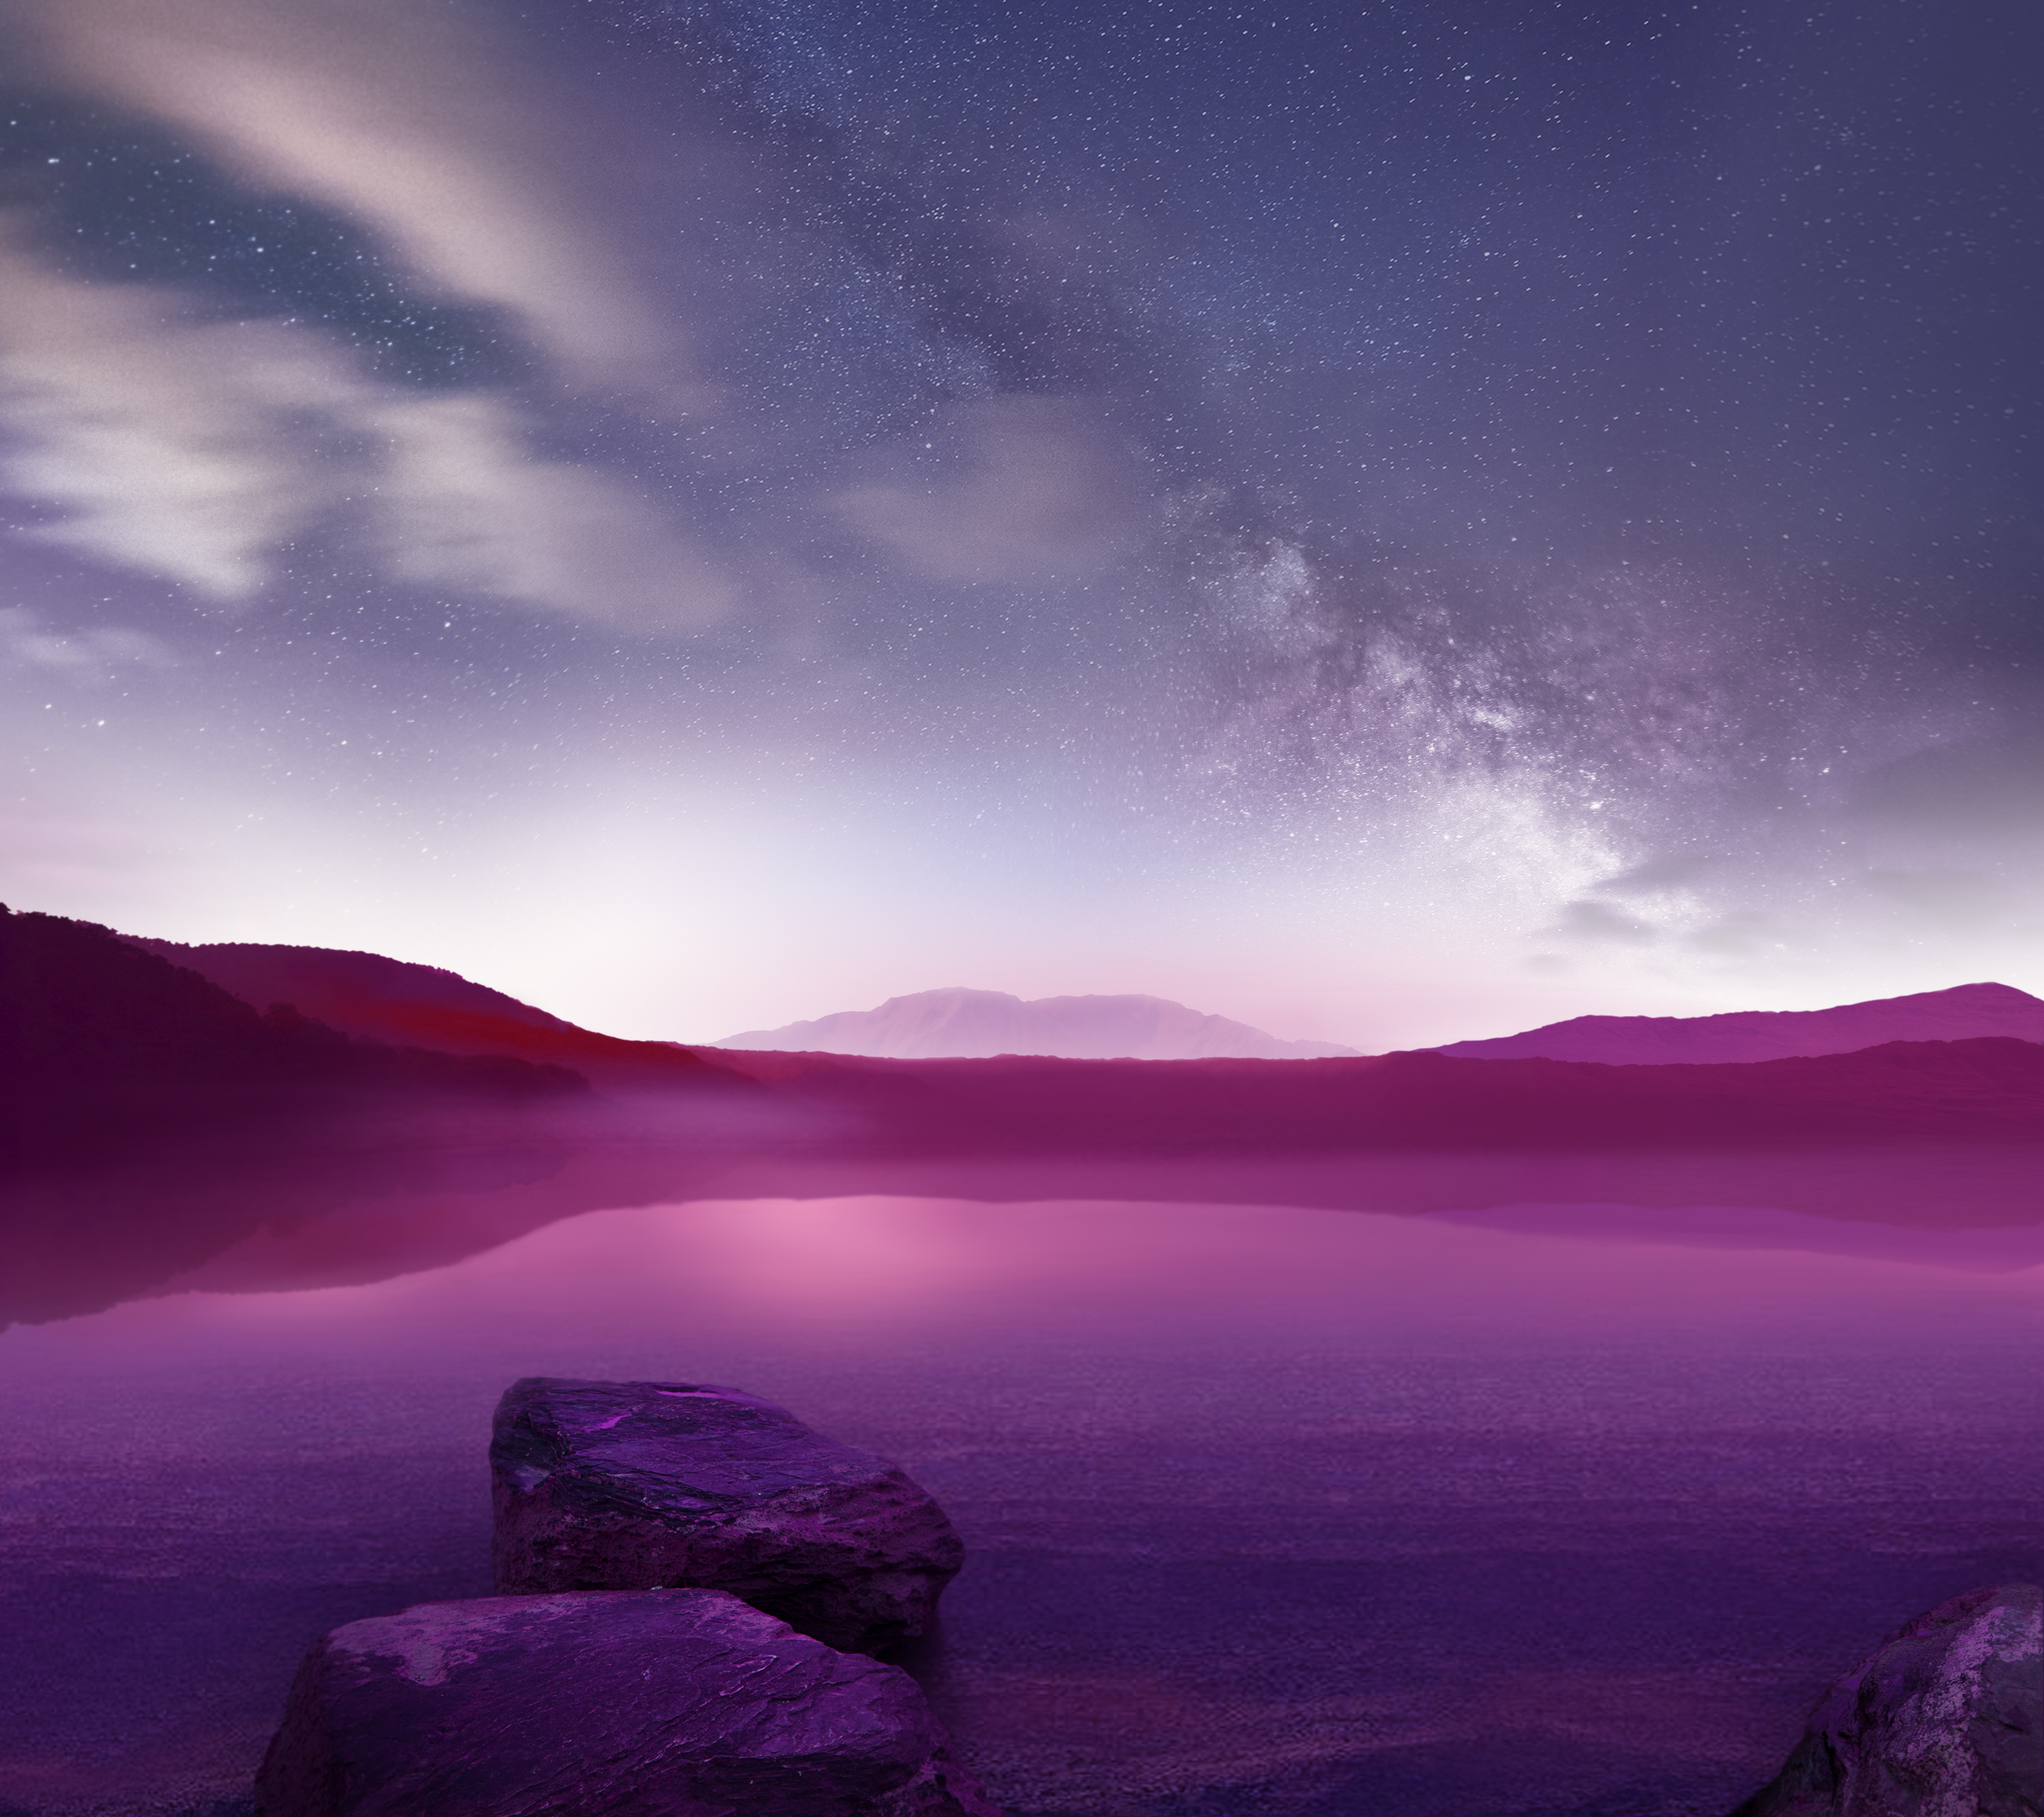 Download these LG G3 wallpapers for your phone - Phandroid